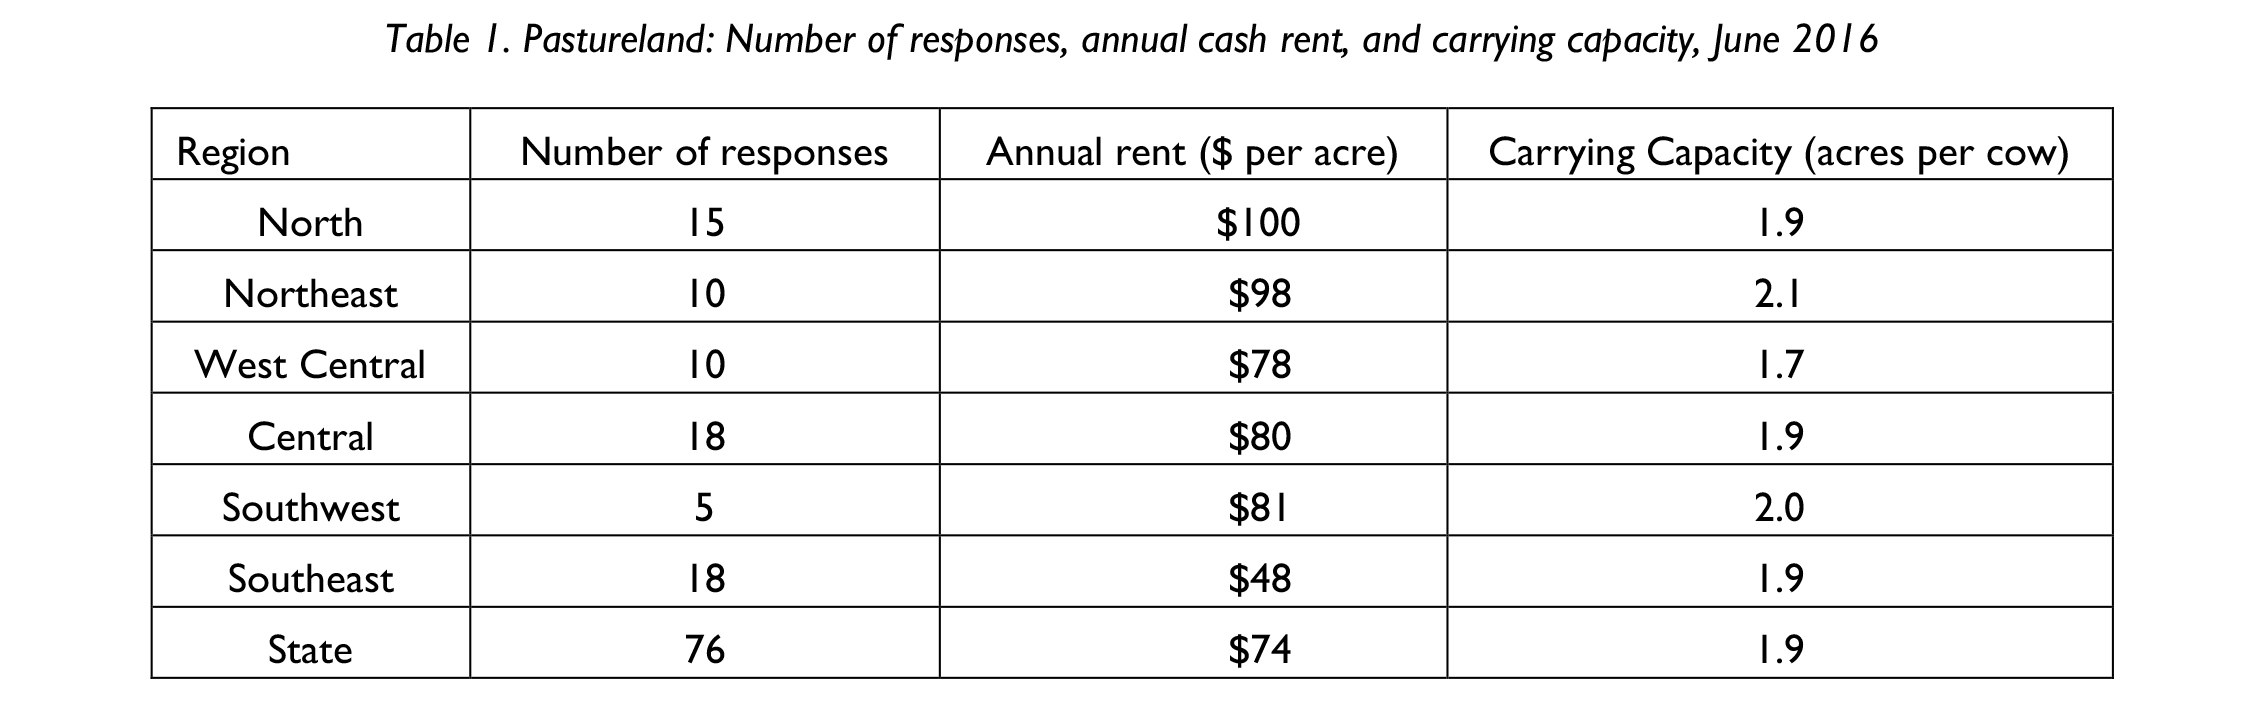 Table 1. Pastureland: Number of responses, annual cash rent, and carrying capacity, June 2016